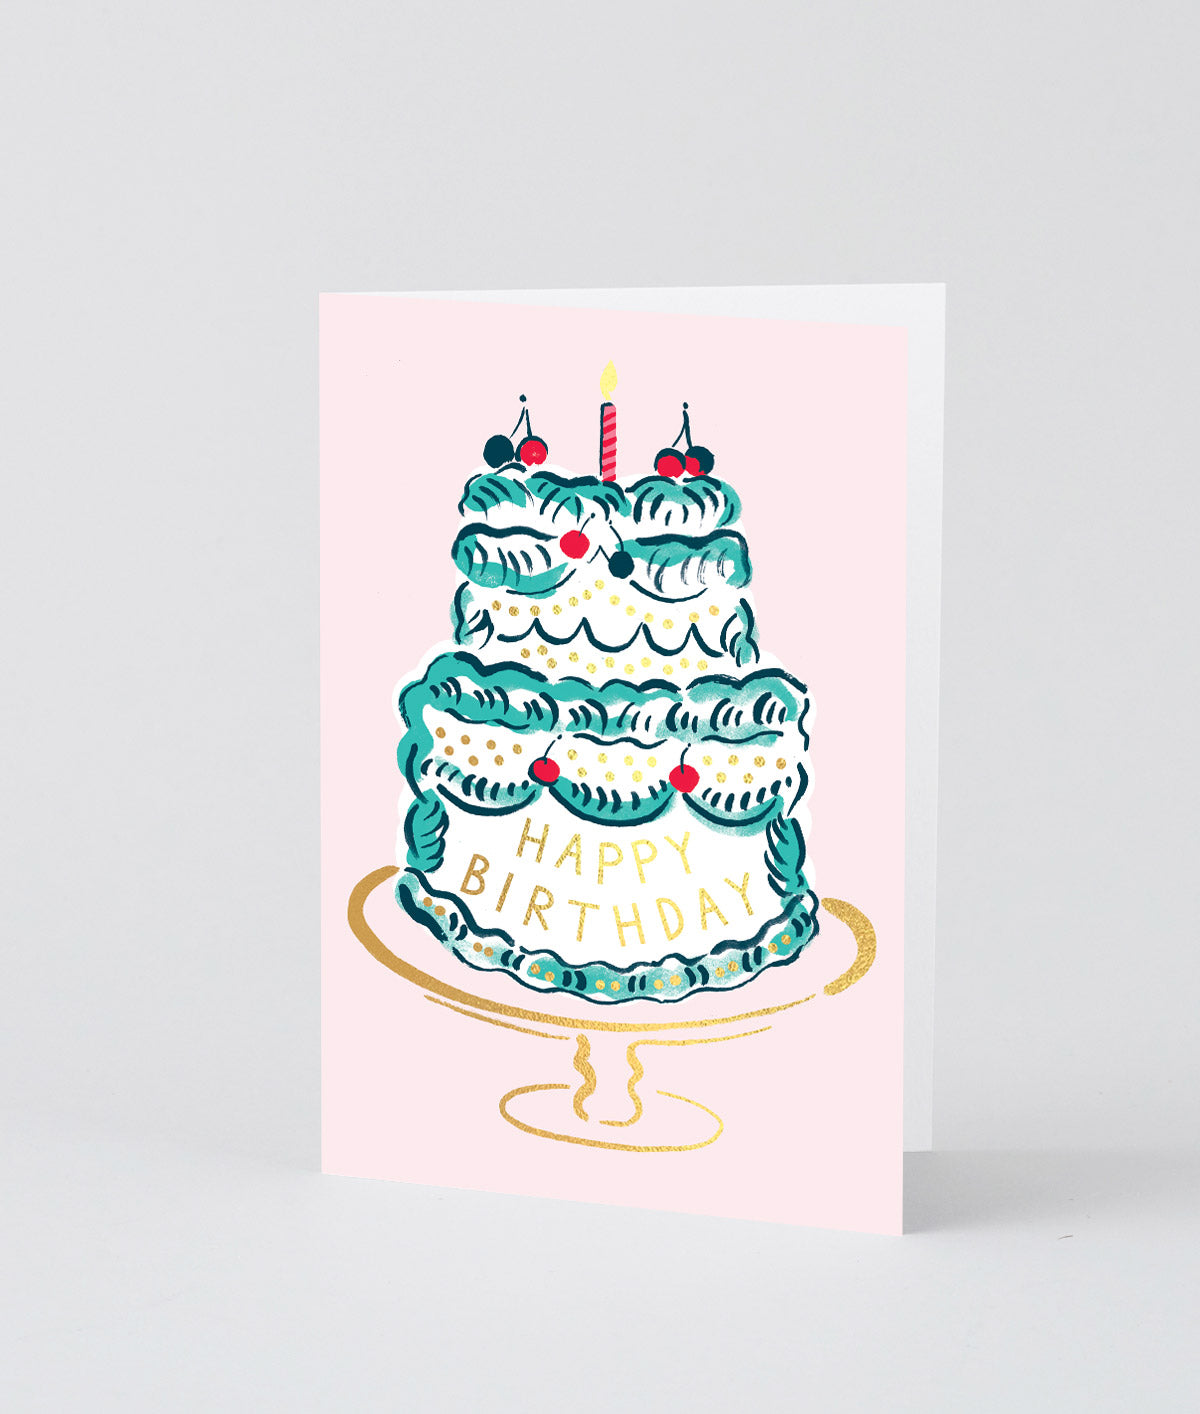 Happy Birthday Cake & Candle Greeting Card